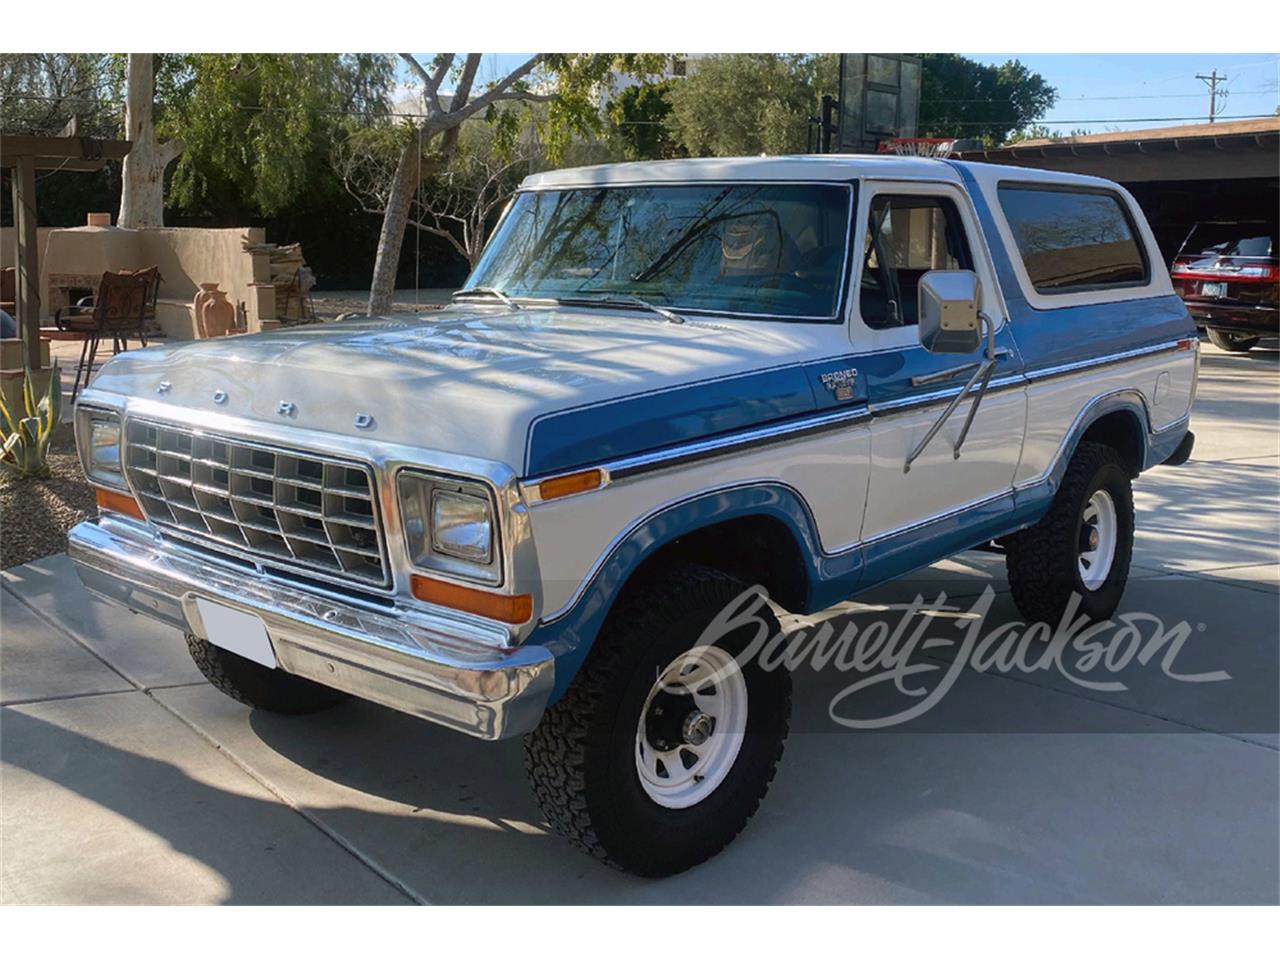 For Sale at Auction: 1978 Ford Bronco in Scottsdale, Arizona for sale in Scottsdale, AZ